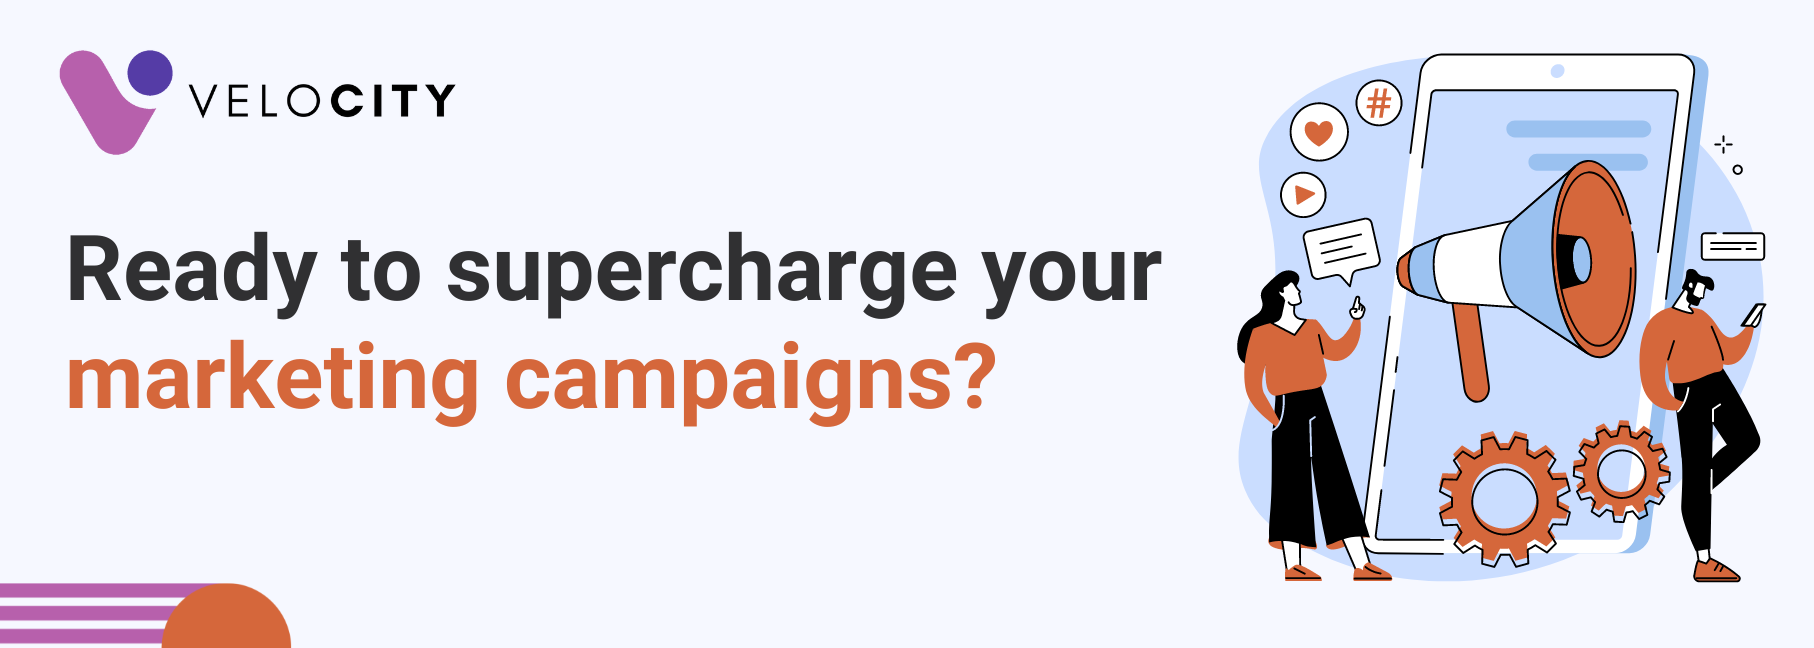 Ready to supercharge your marketing campaigns